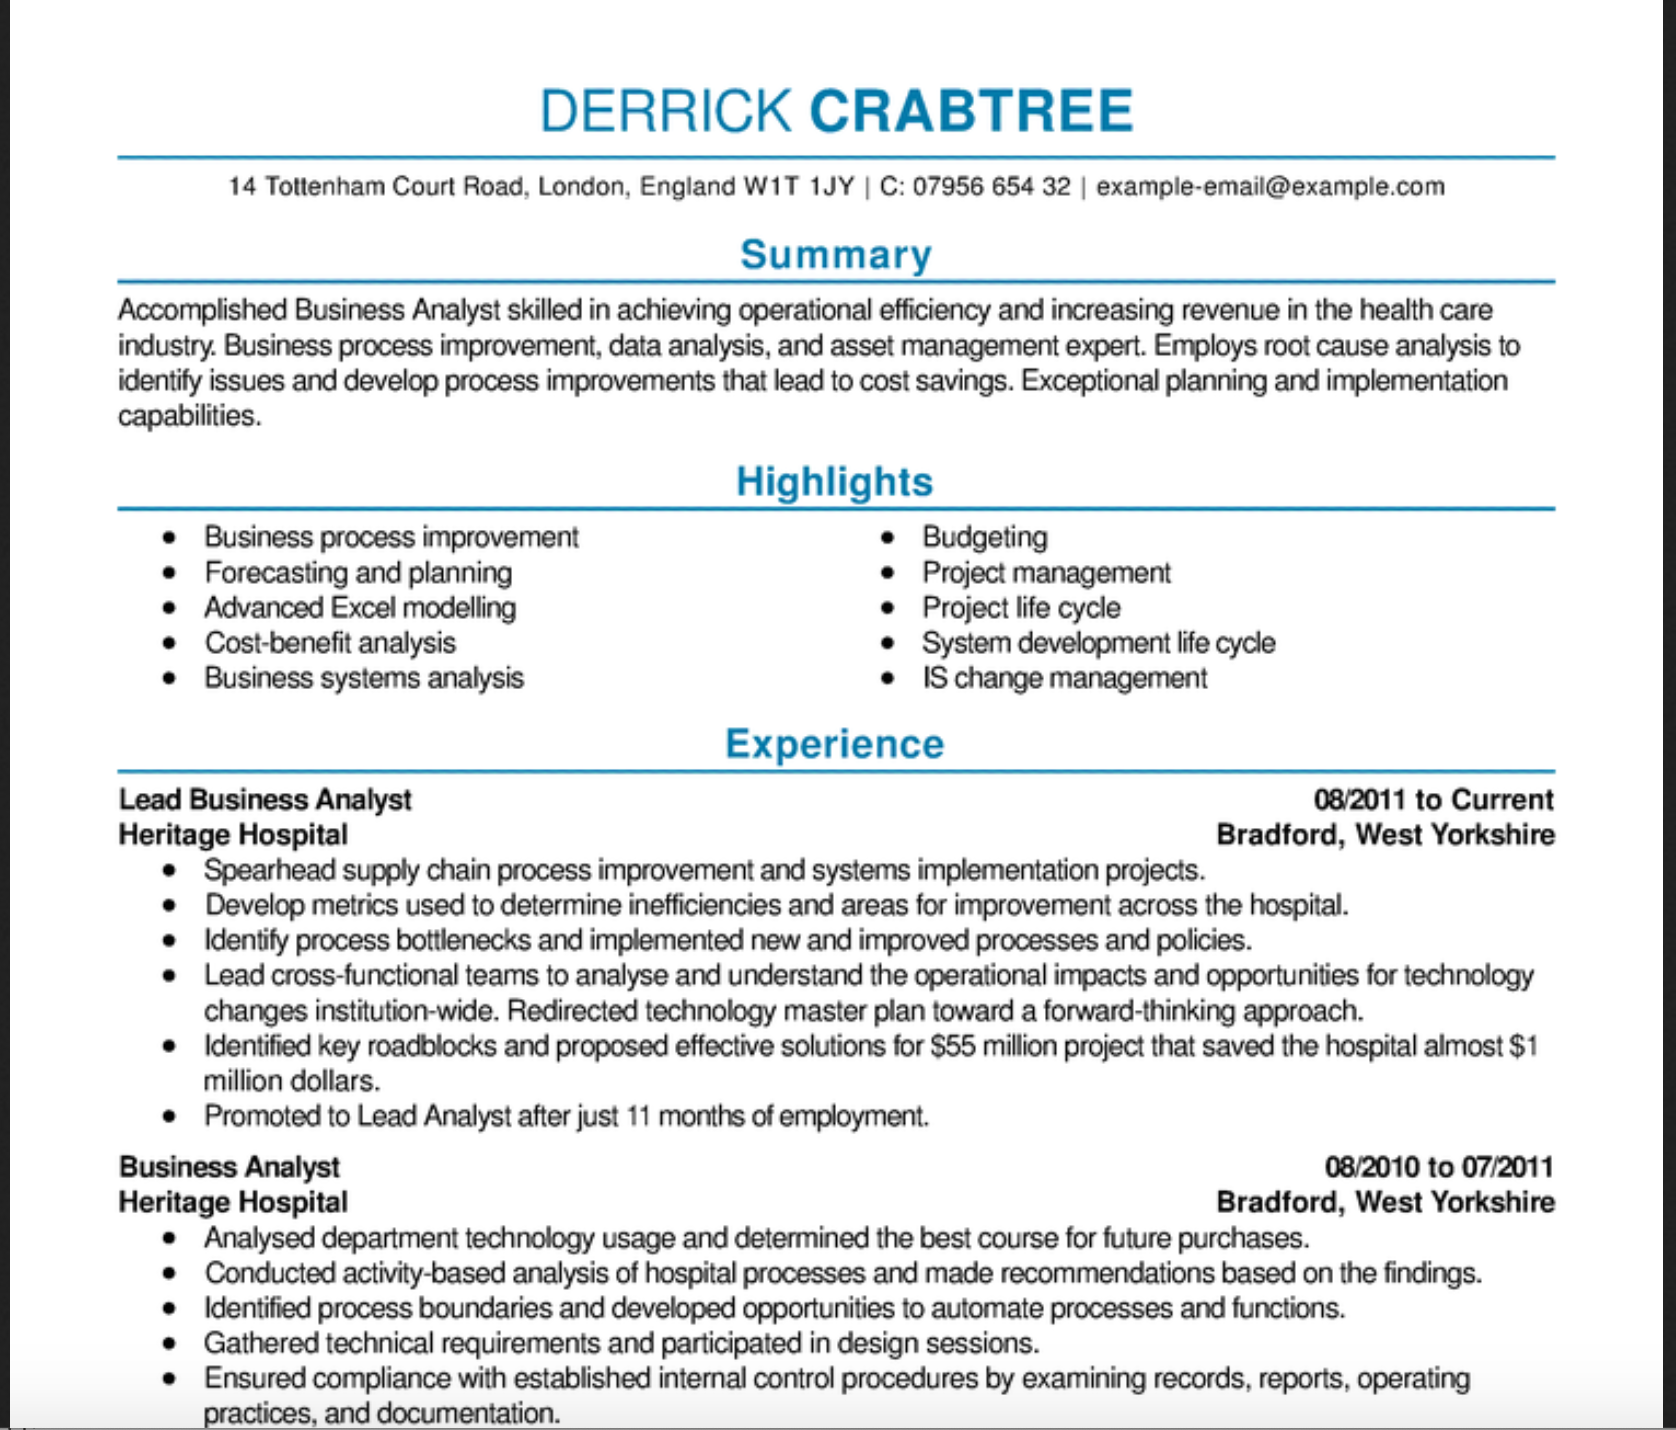 Resume example formatted with centered headings and brief descriptions on a single page document